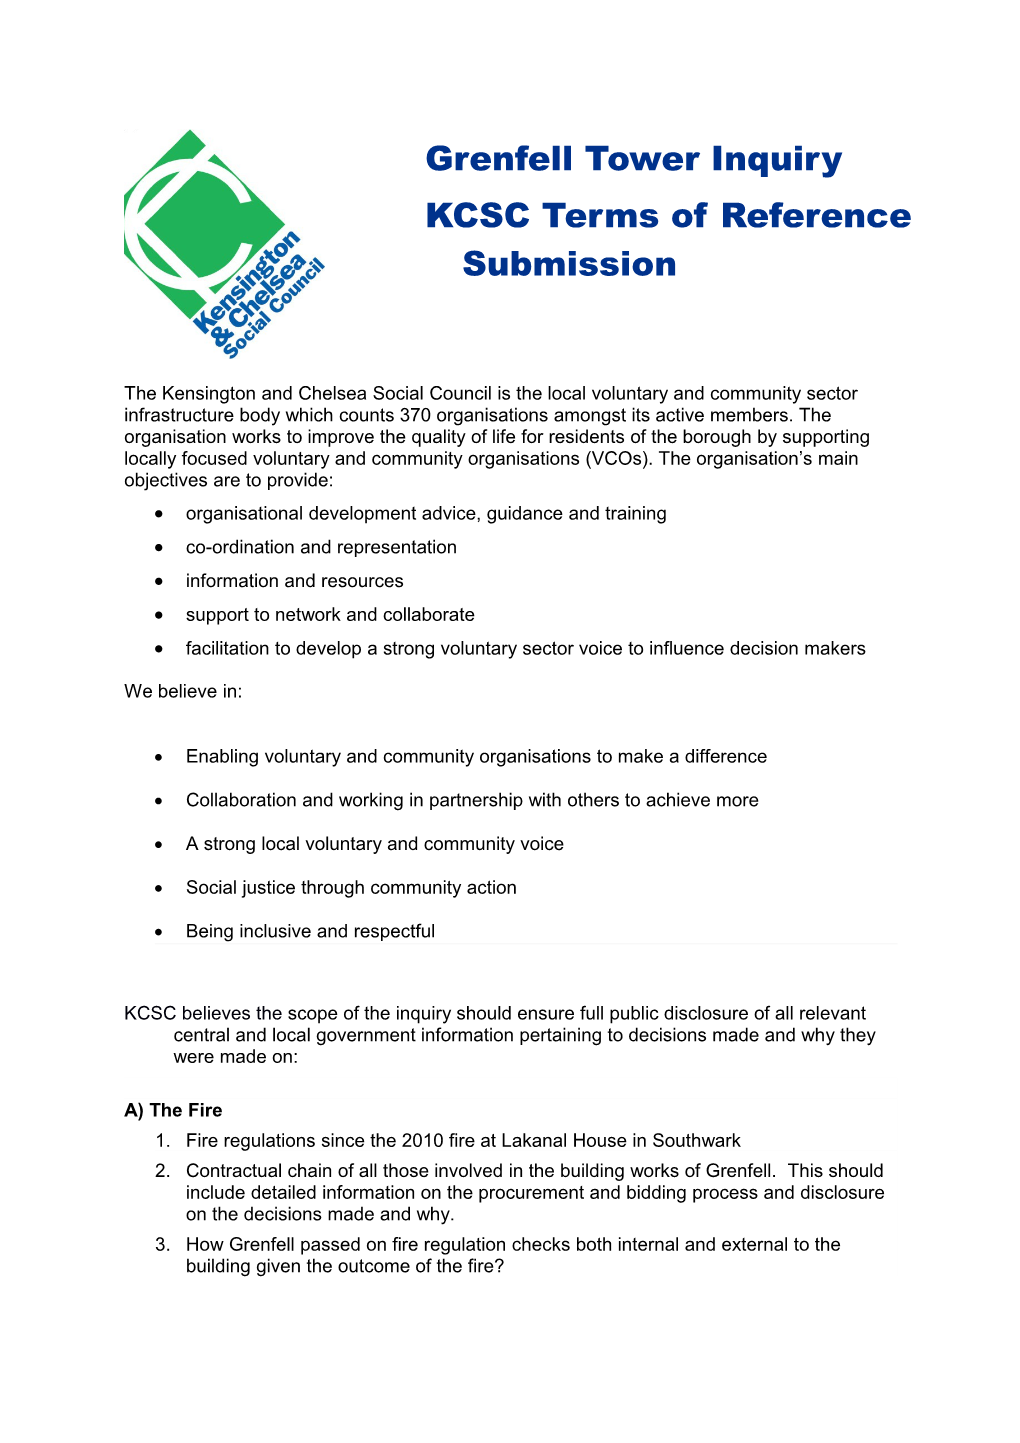 KCSC Terms of Reference Submission